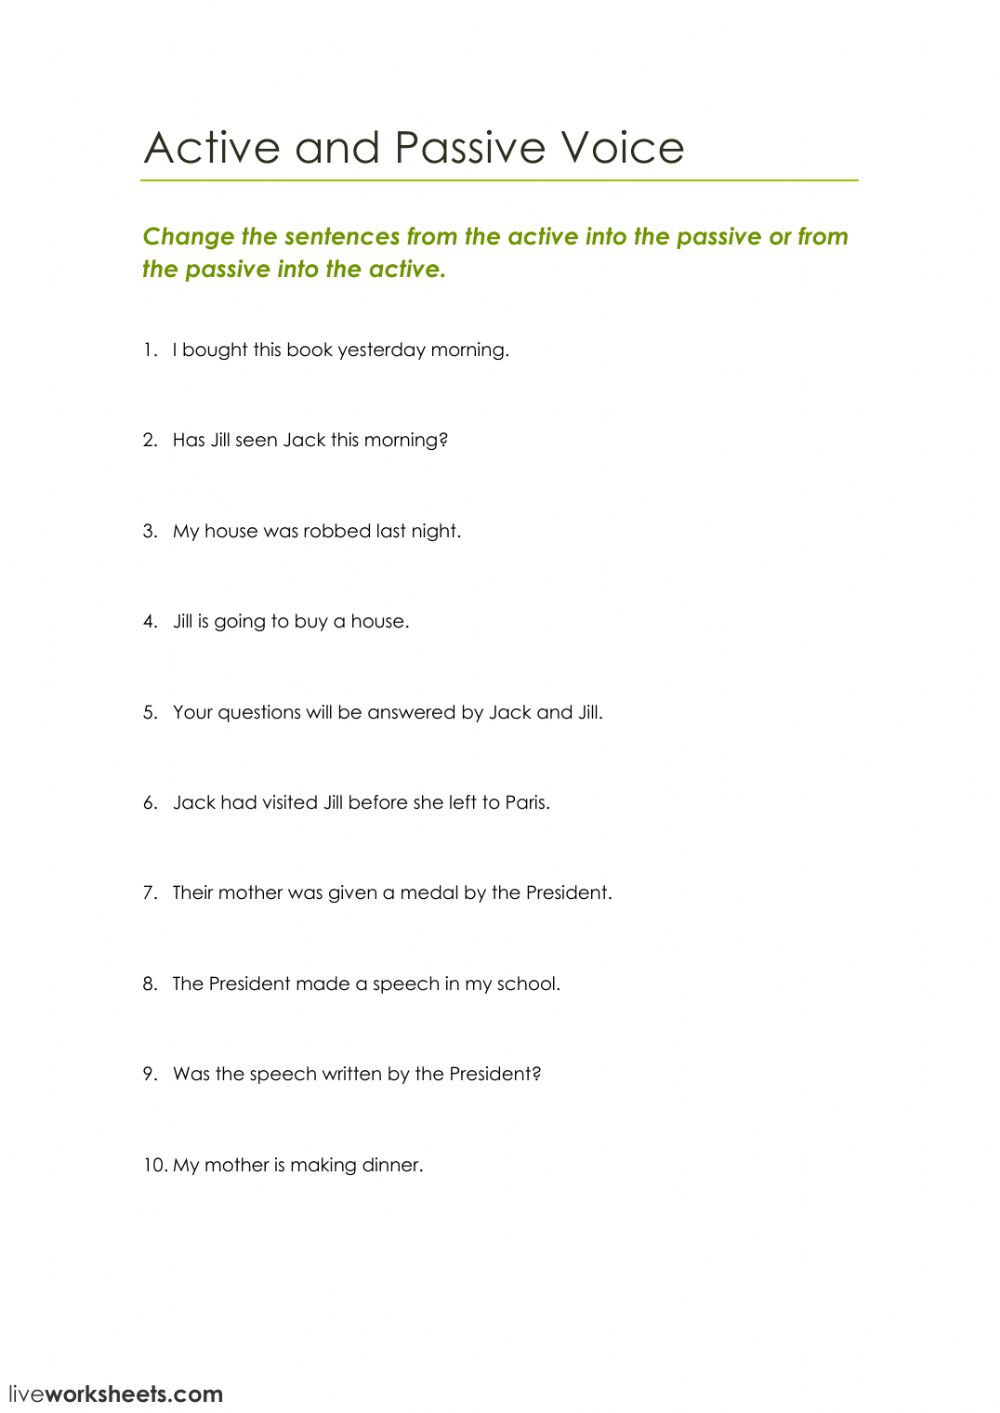 Active Passive Voice Worksheet Active and Passive Voice Interactive Worksheet